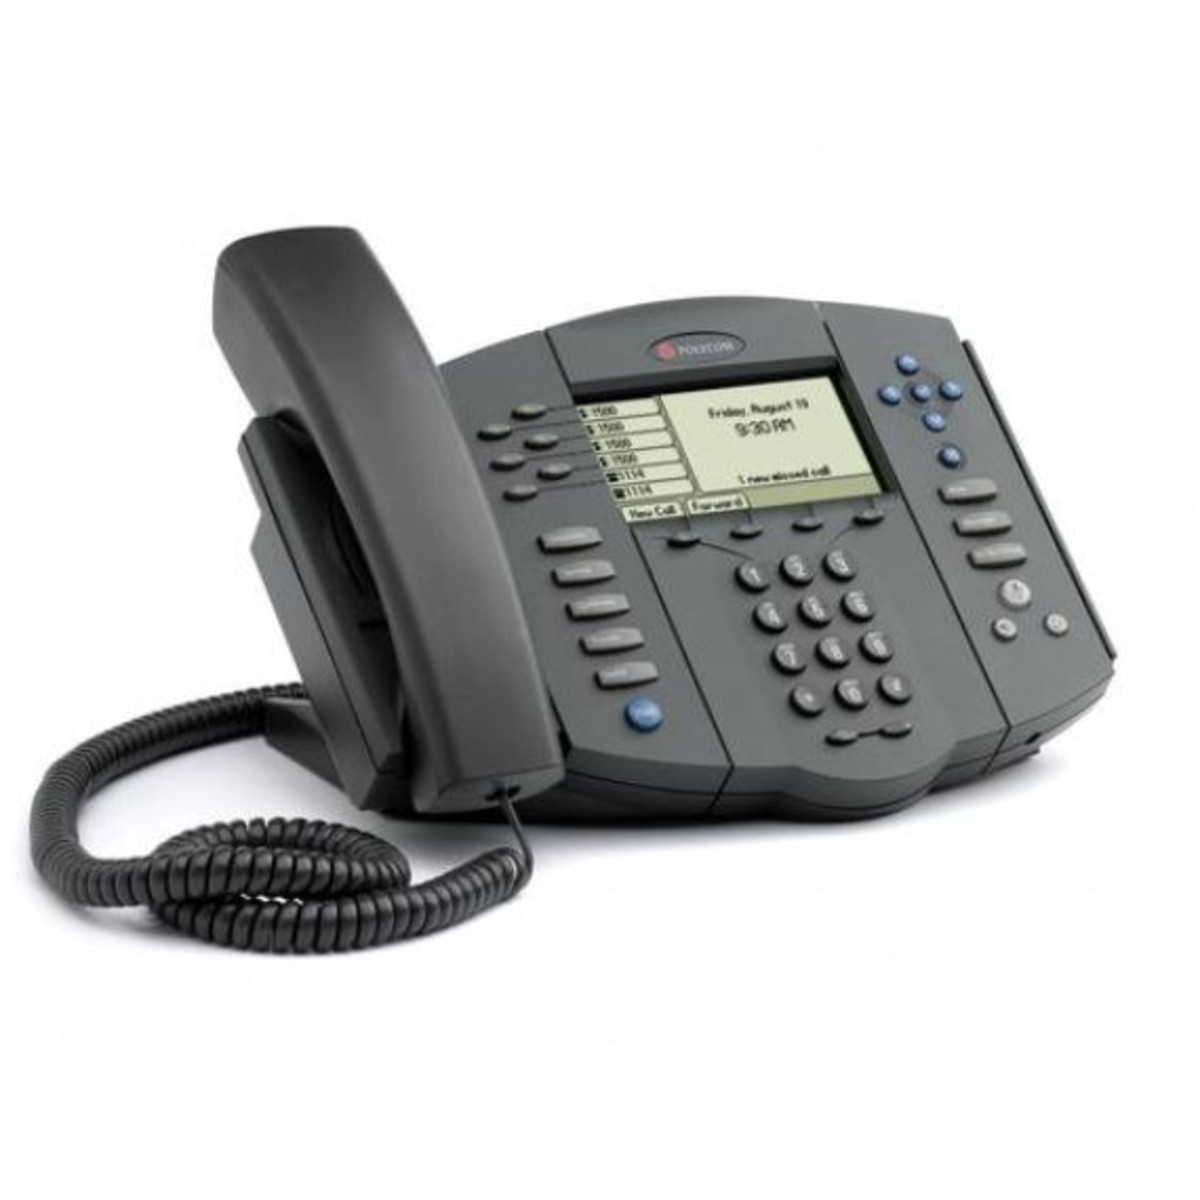 Polycom SoundPoint IP 601 Phone with Power Supply (p/n- 2200-11631-001)